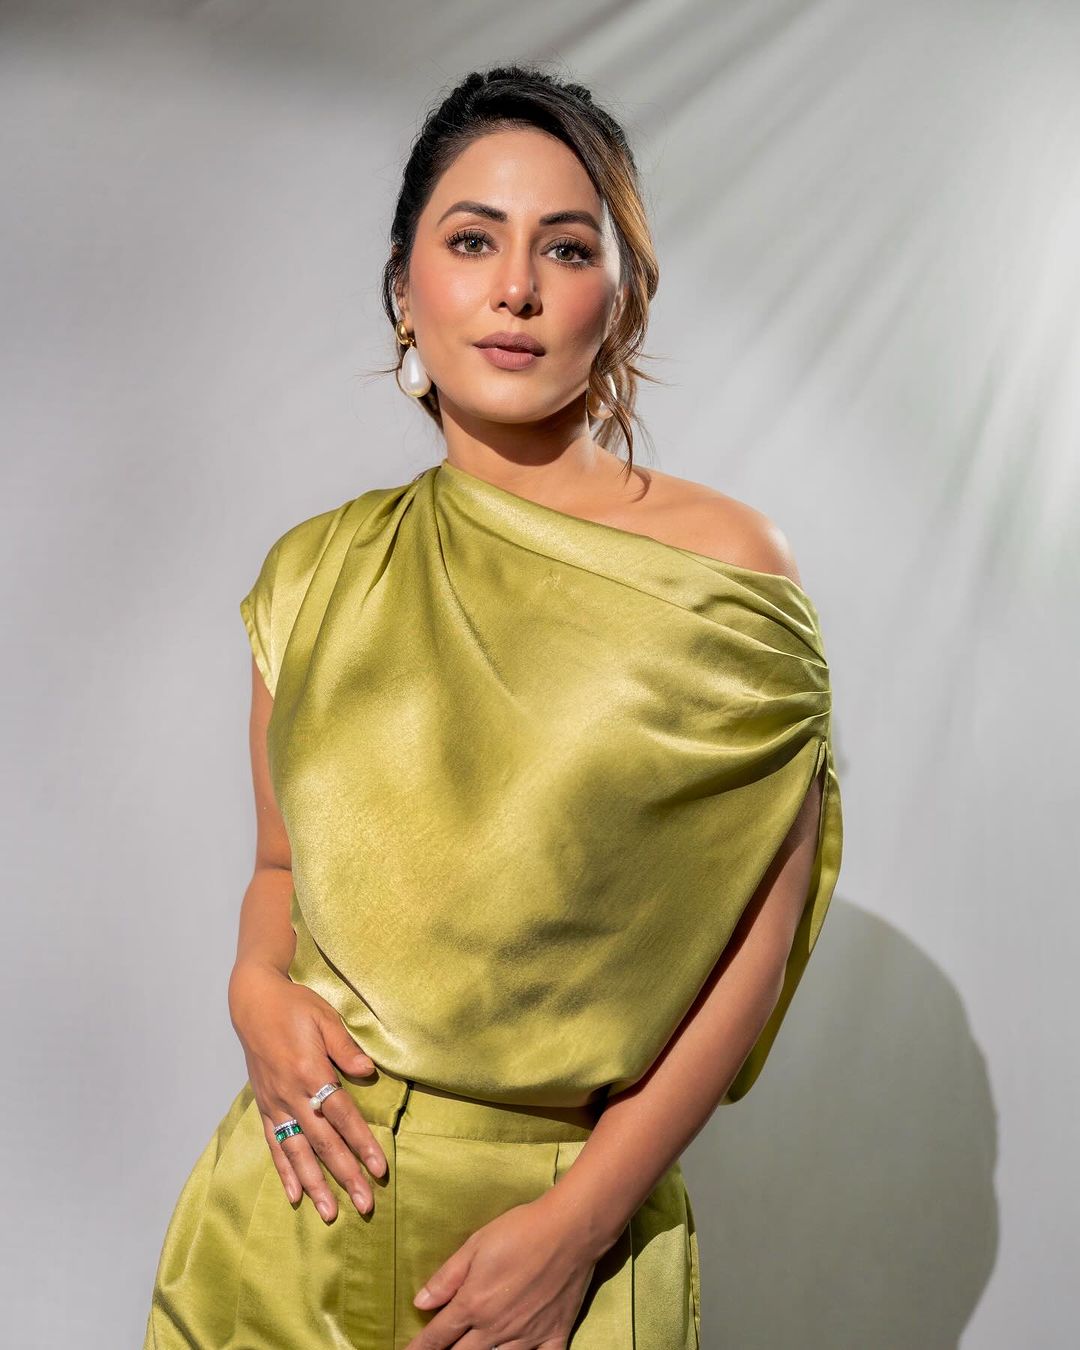 Our Telly World’s Darling Hina Khan Fall Sick For This Reason. It Shocks You, Here Spilled The Beans! 